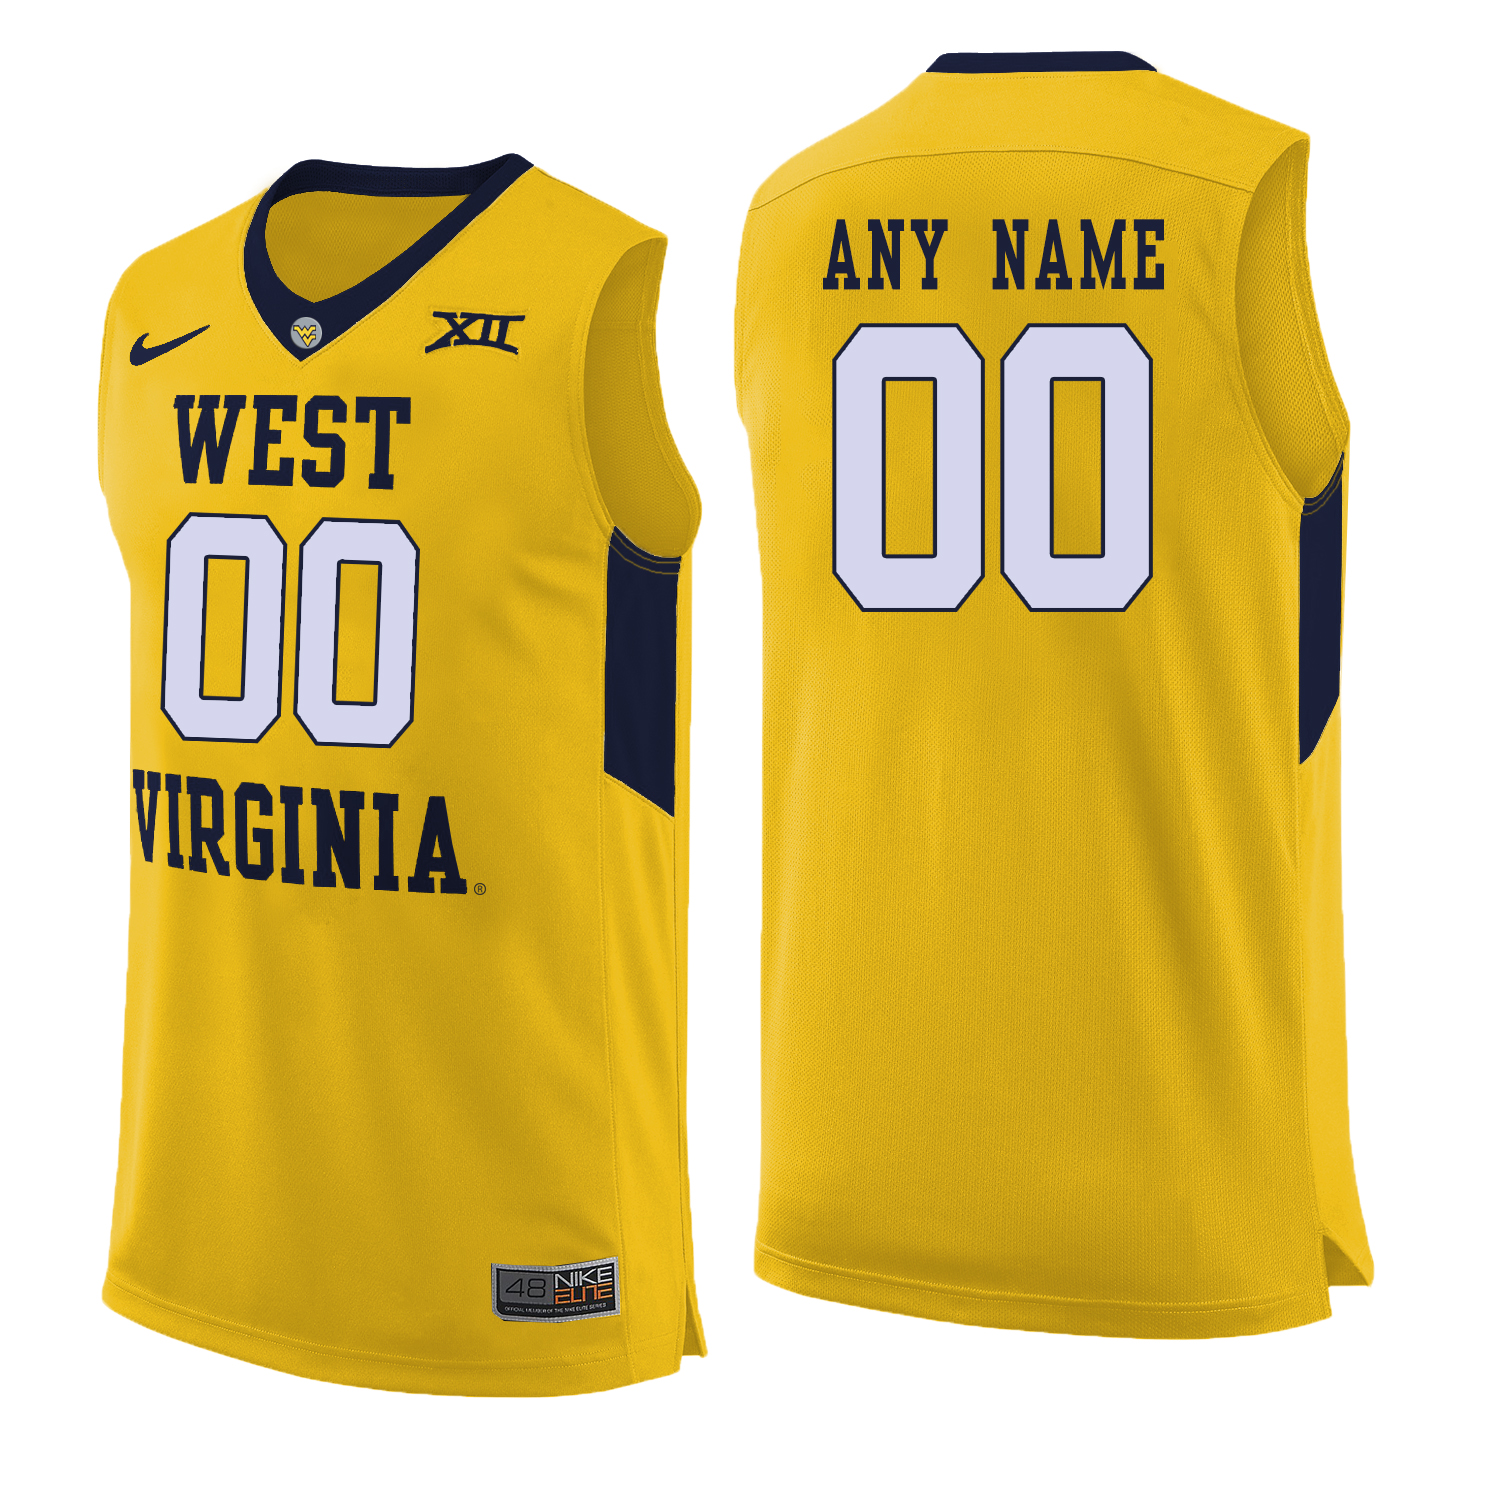 West Virginia Mountaineers Yellow Men's Customized College Basketball Jersey